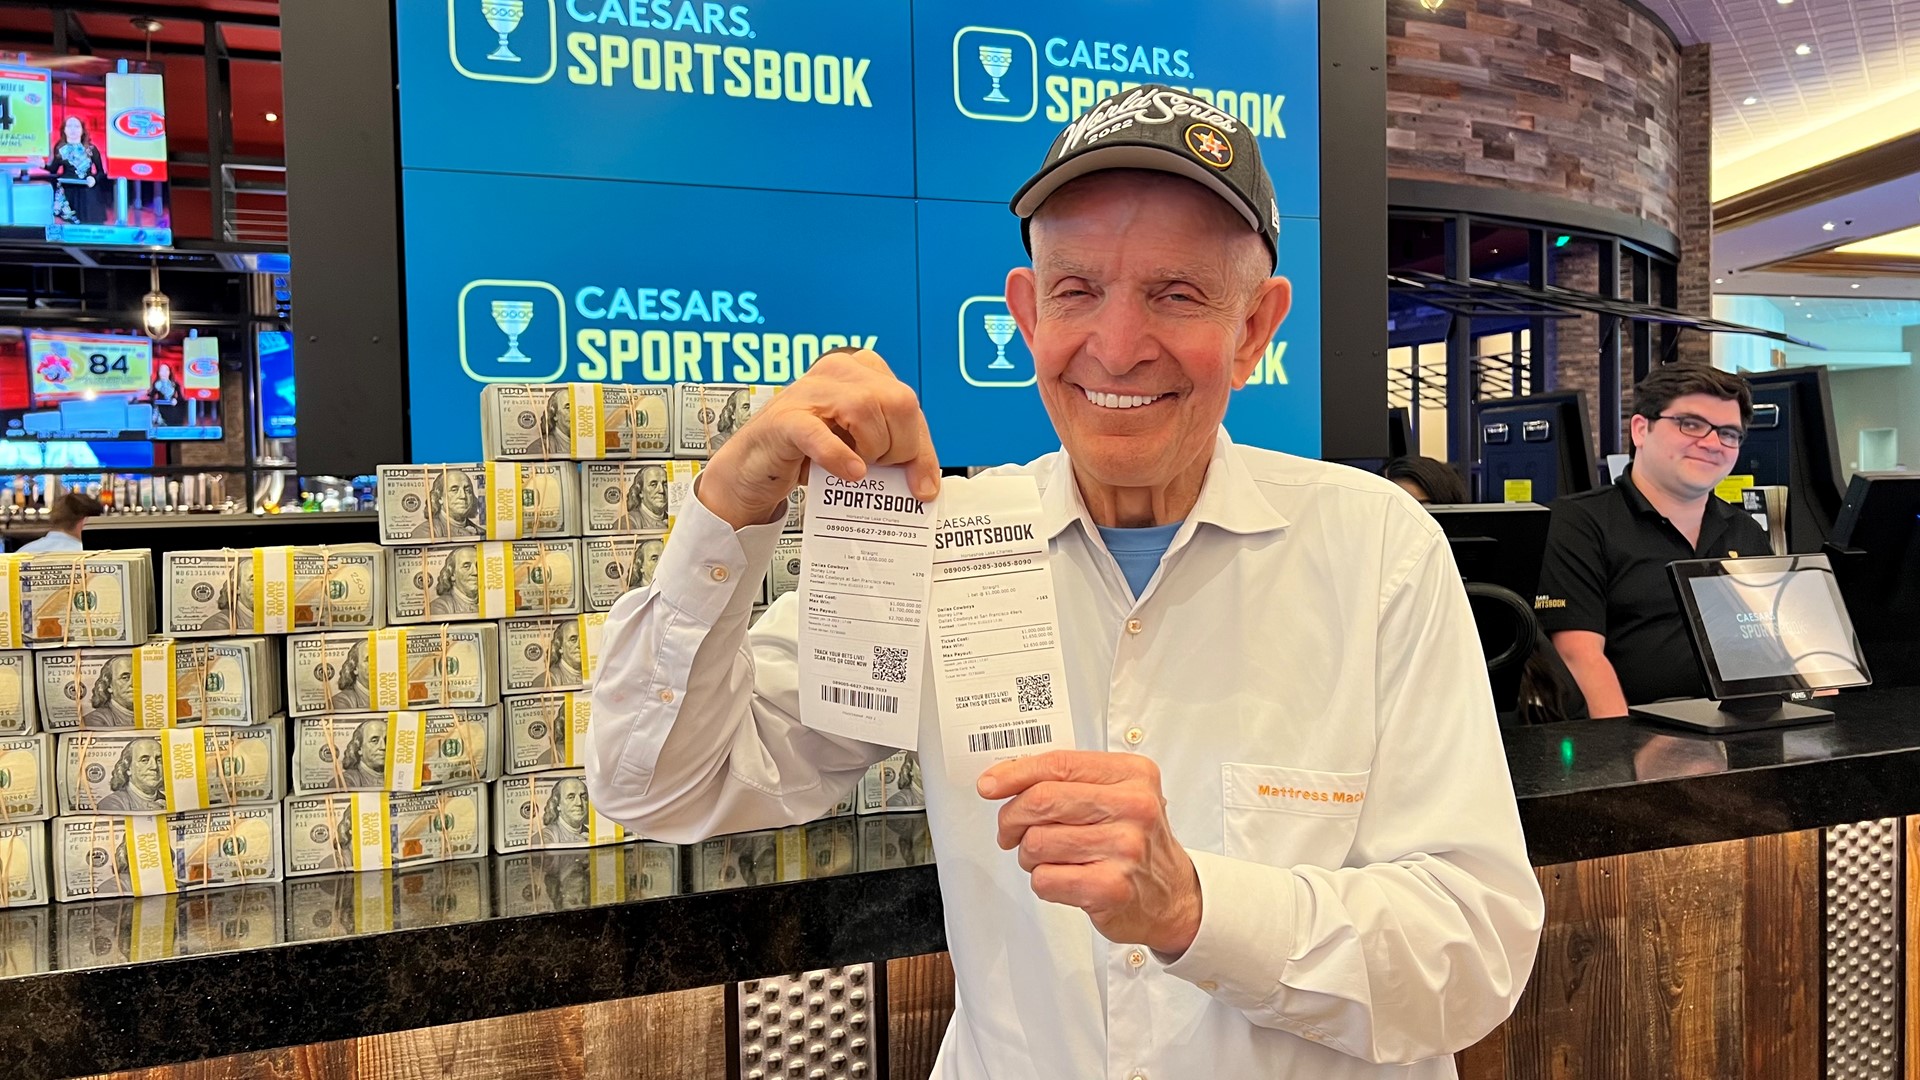 Jim “Mattress Mack” McIngvale is tacking on more bets for the Dallas Cowboys.